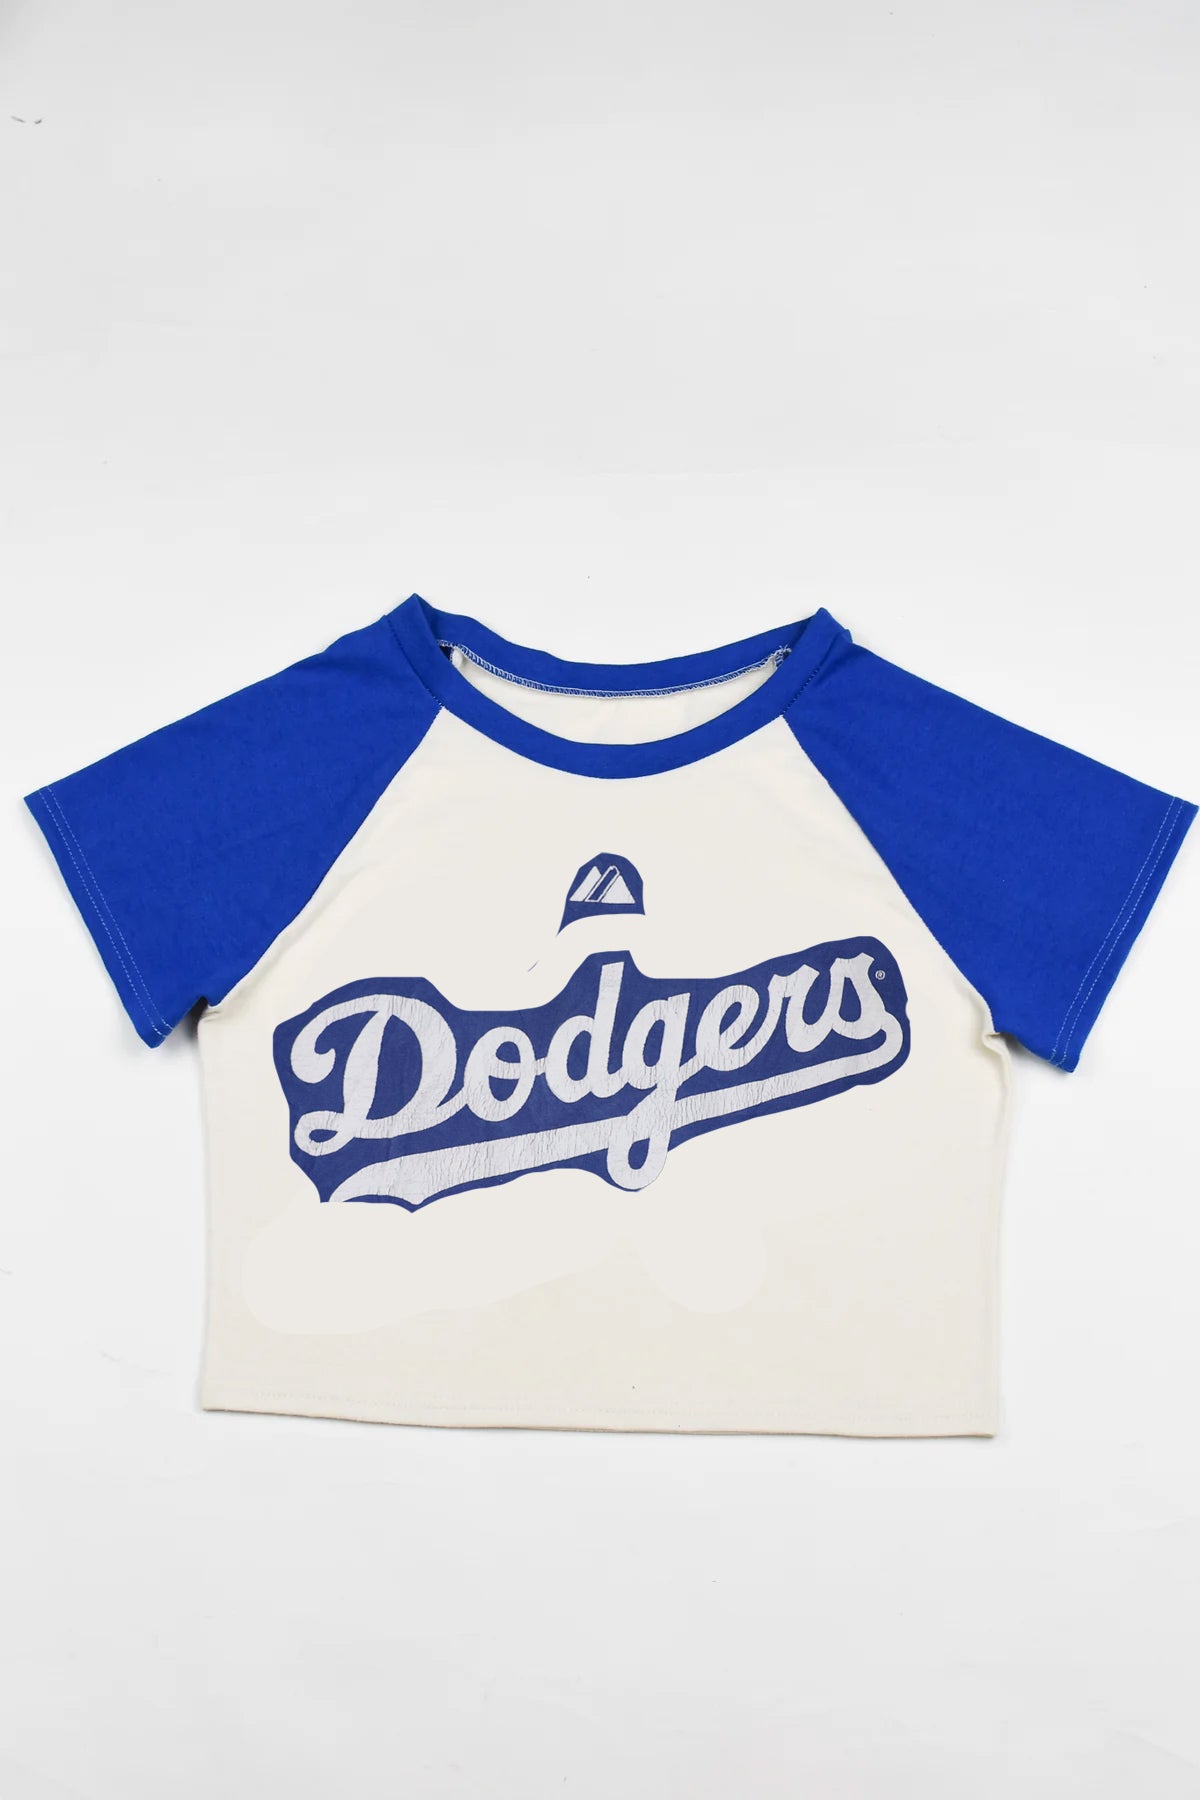 Upcycled Custom Dodgers Baby Tee For Jacqueline